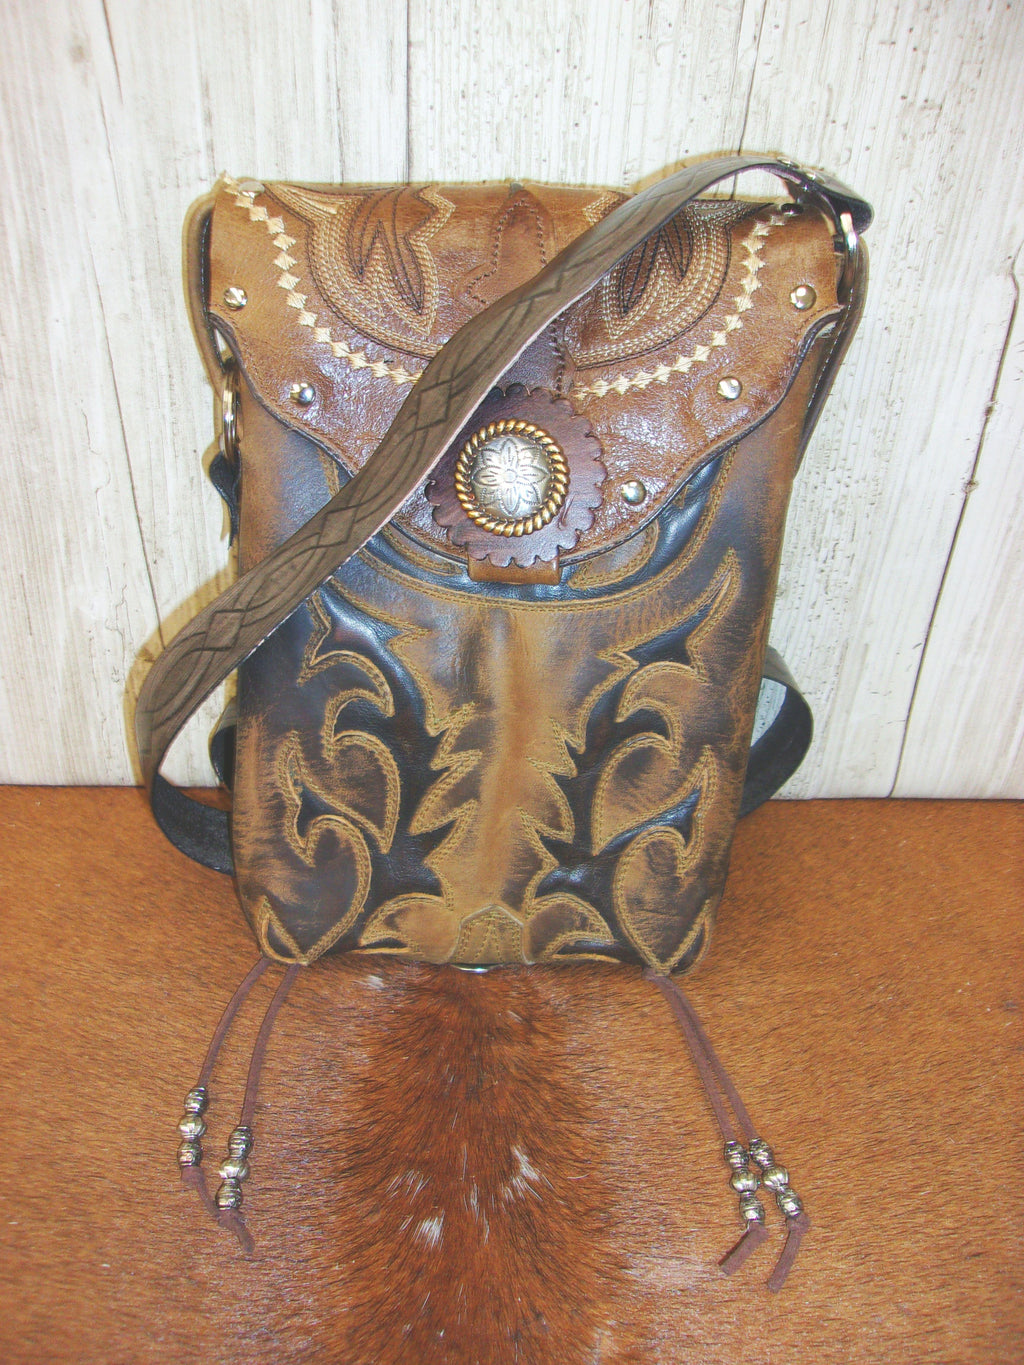 Cowboy Boot Concealed Carry Purse - Crossbody Conceal Carry Purse CB154 cowboy boot purses, western fringe purse, handmade leather purses, boot purse, handmade western purse, custom leather handbags Chris Thompson Bags